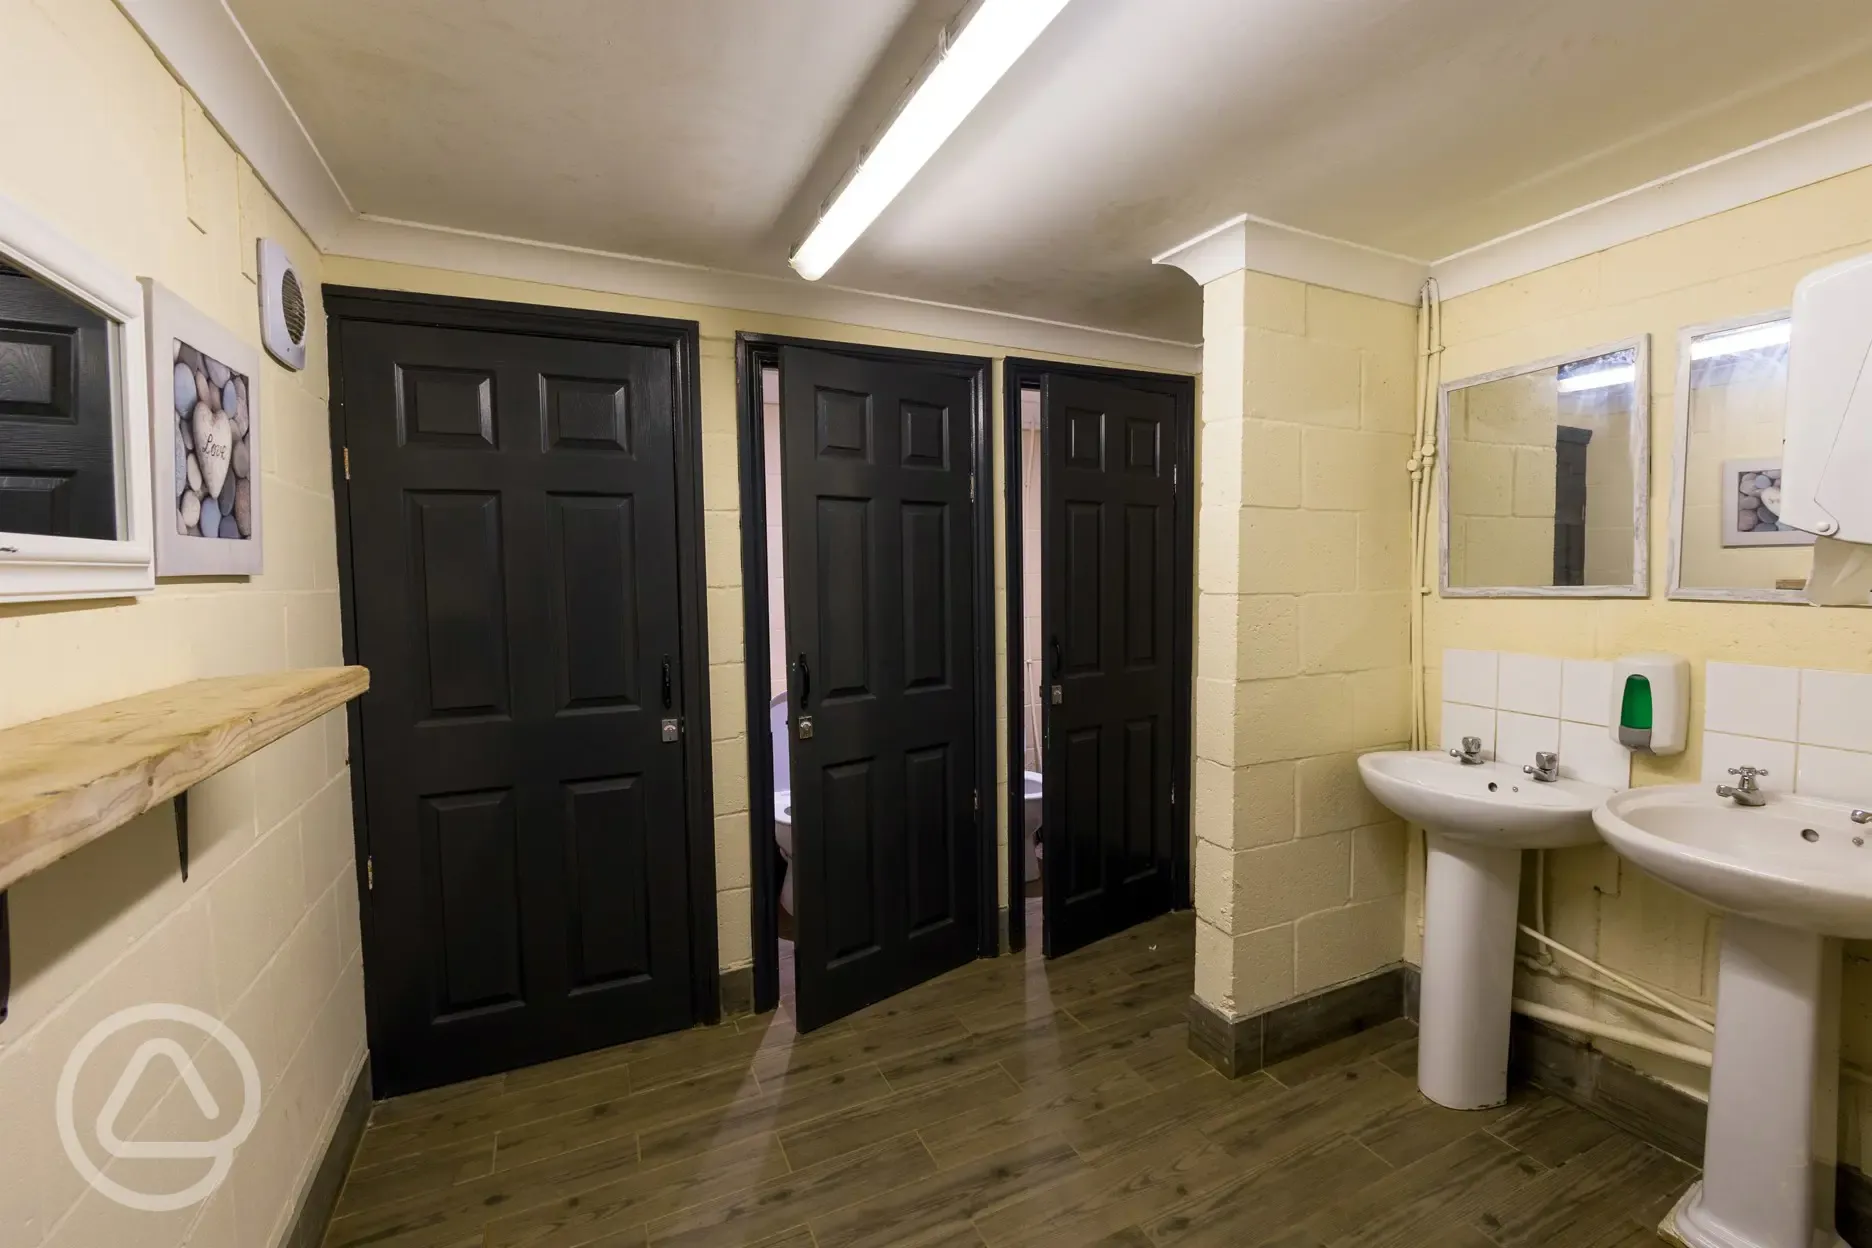 Our ladies toilets with 3 cubicles, unisex also available